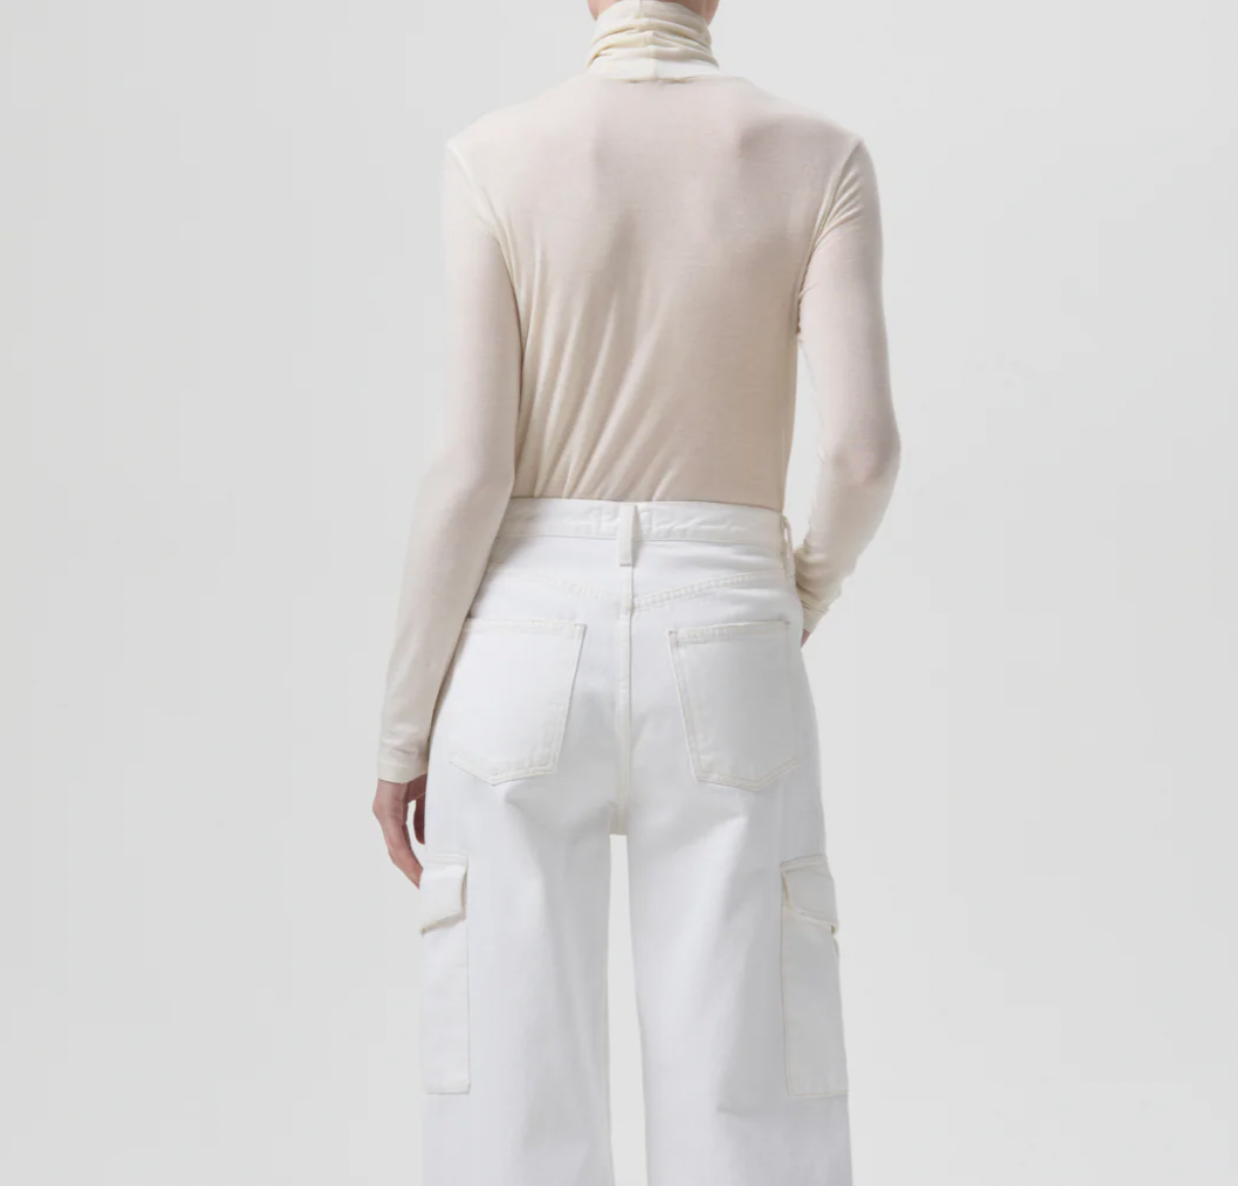 Product Image for Pascale Turtleneck, Oat Milk